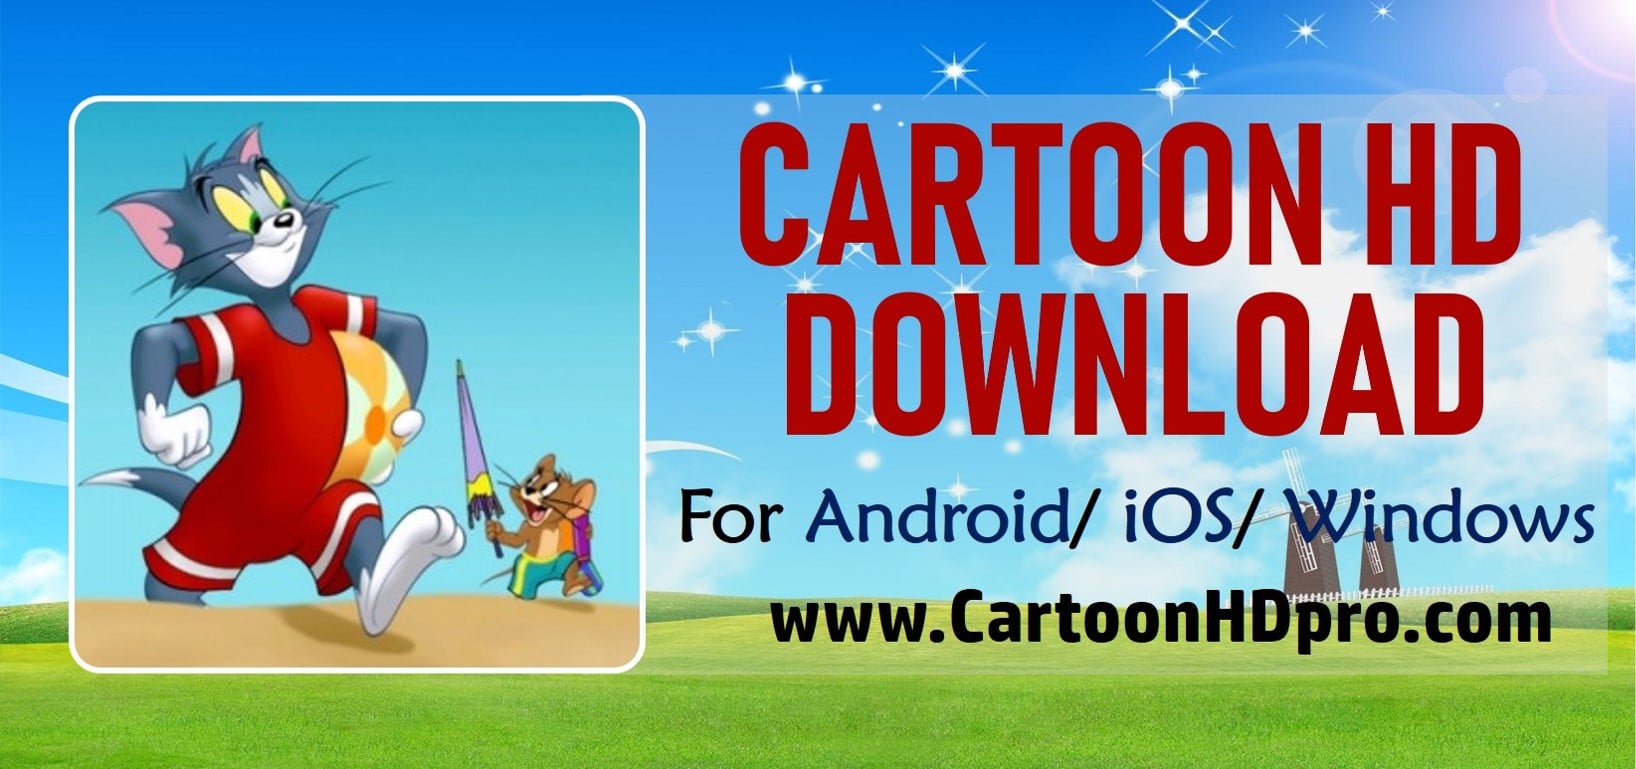 Cartoon HD Download | Free Cartoons, Movies, TV Shows | Official Website  2023